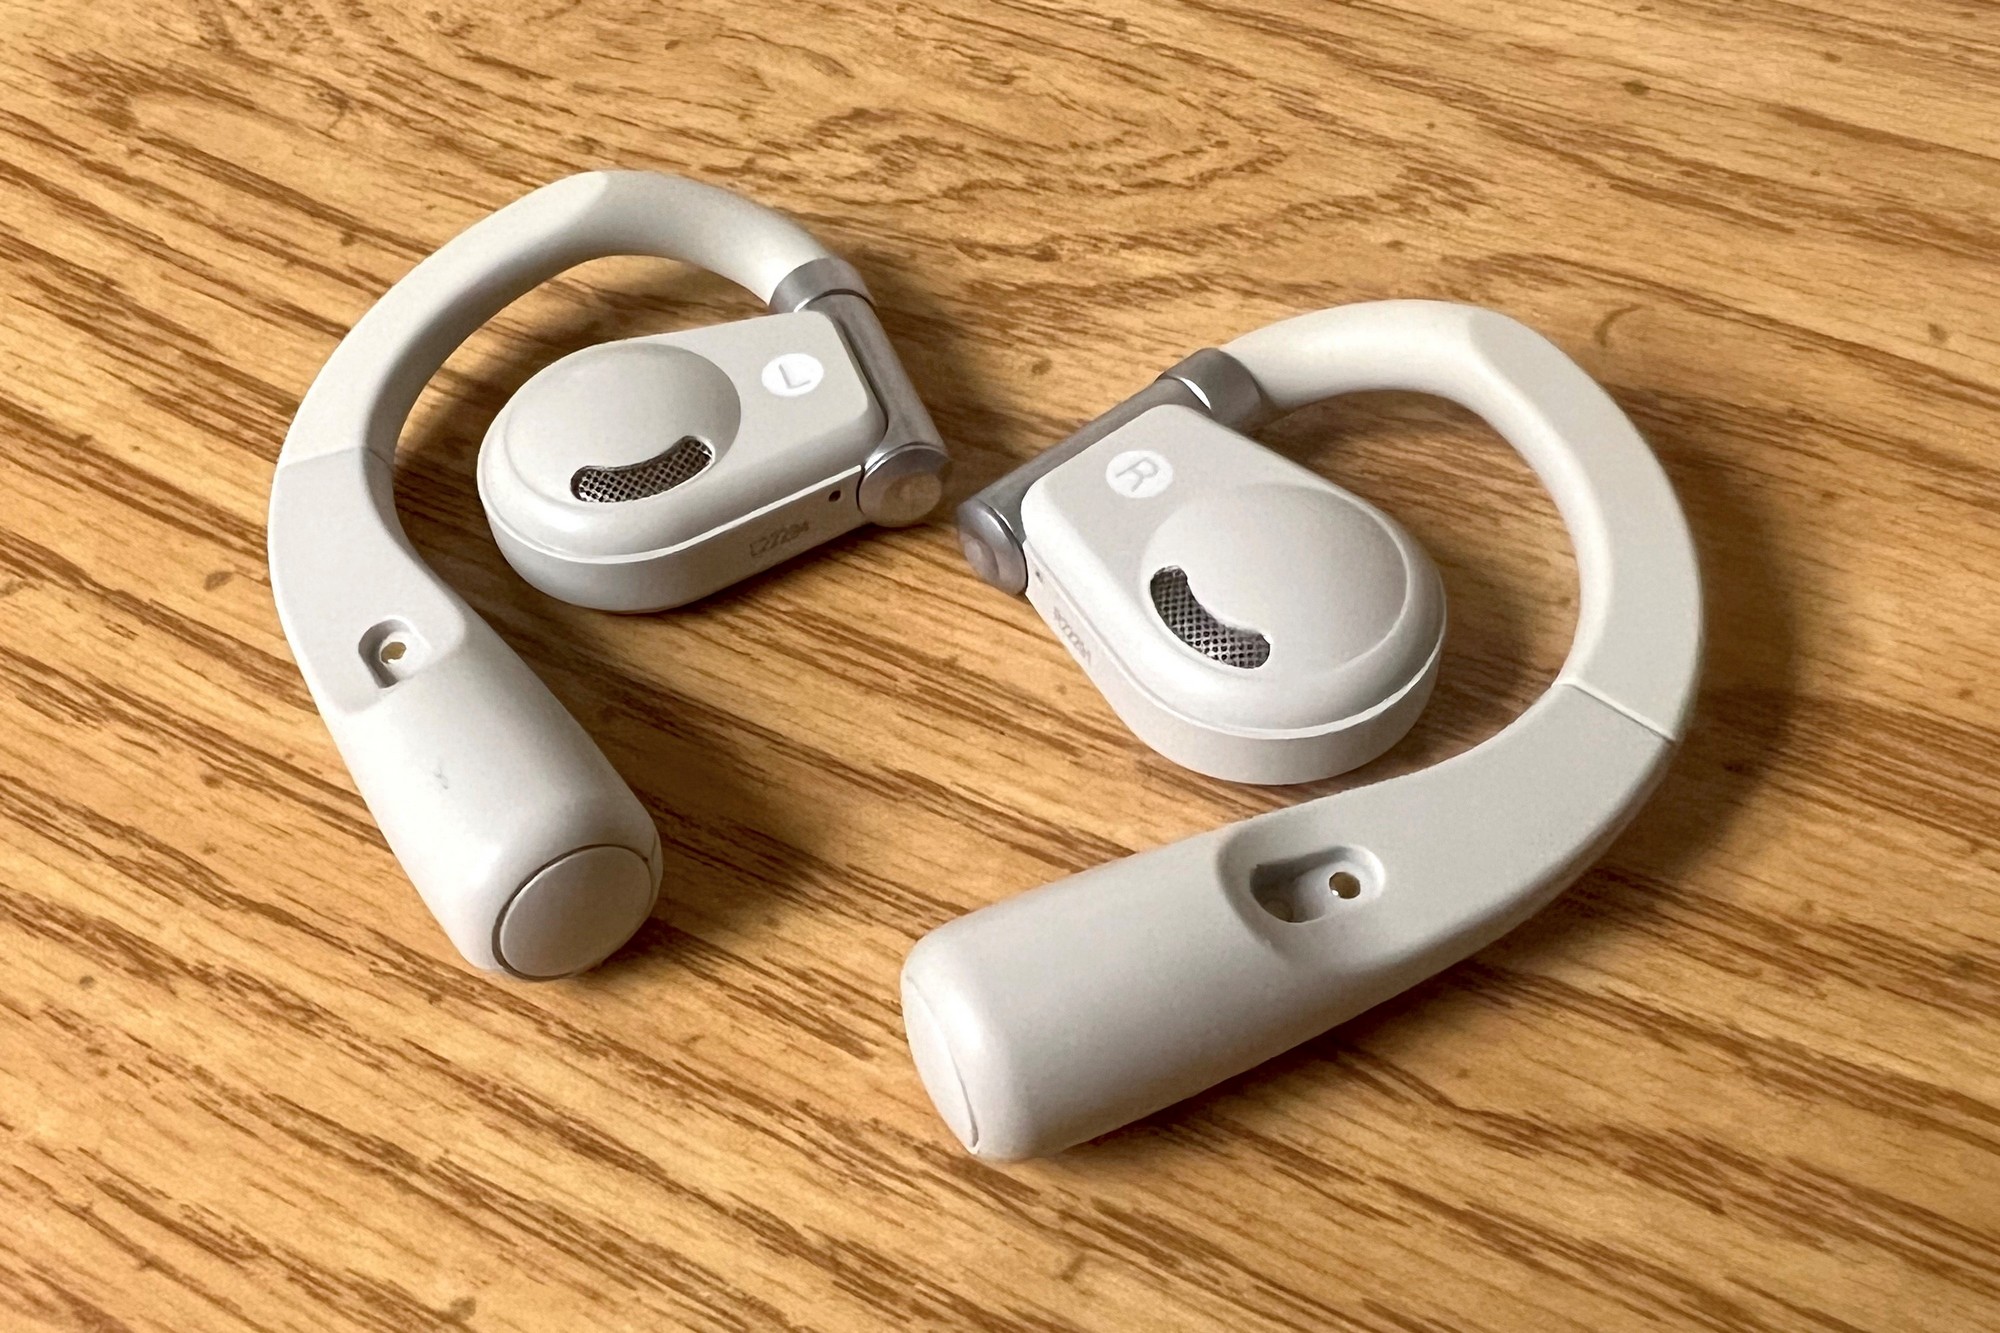 Cleer Arc review: These earphones rest on your ears, not in them